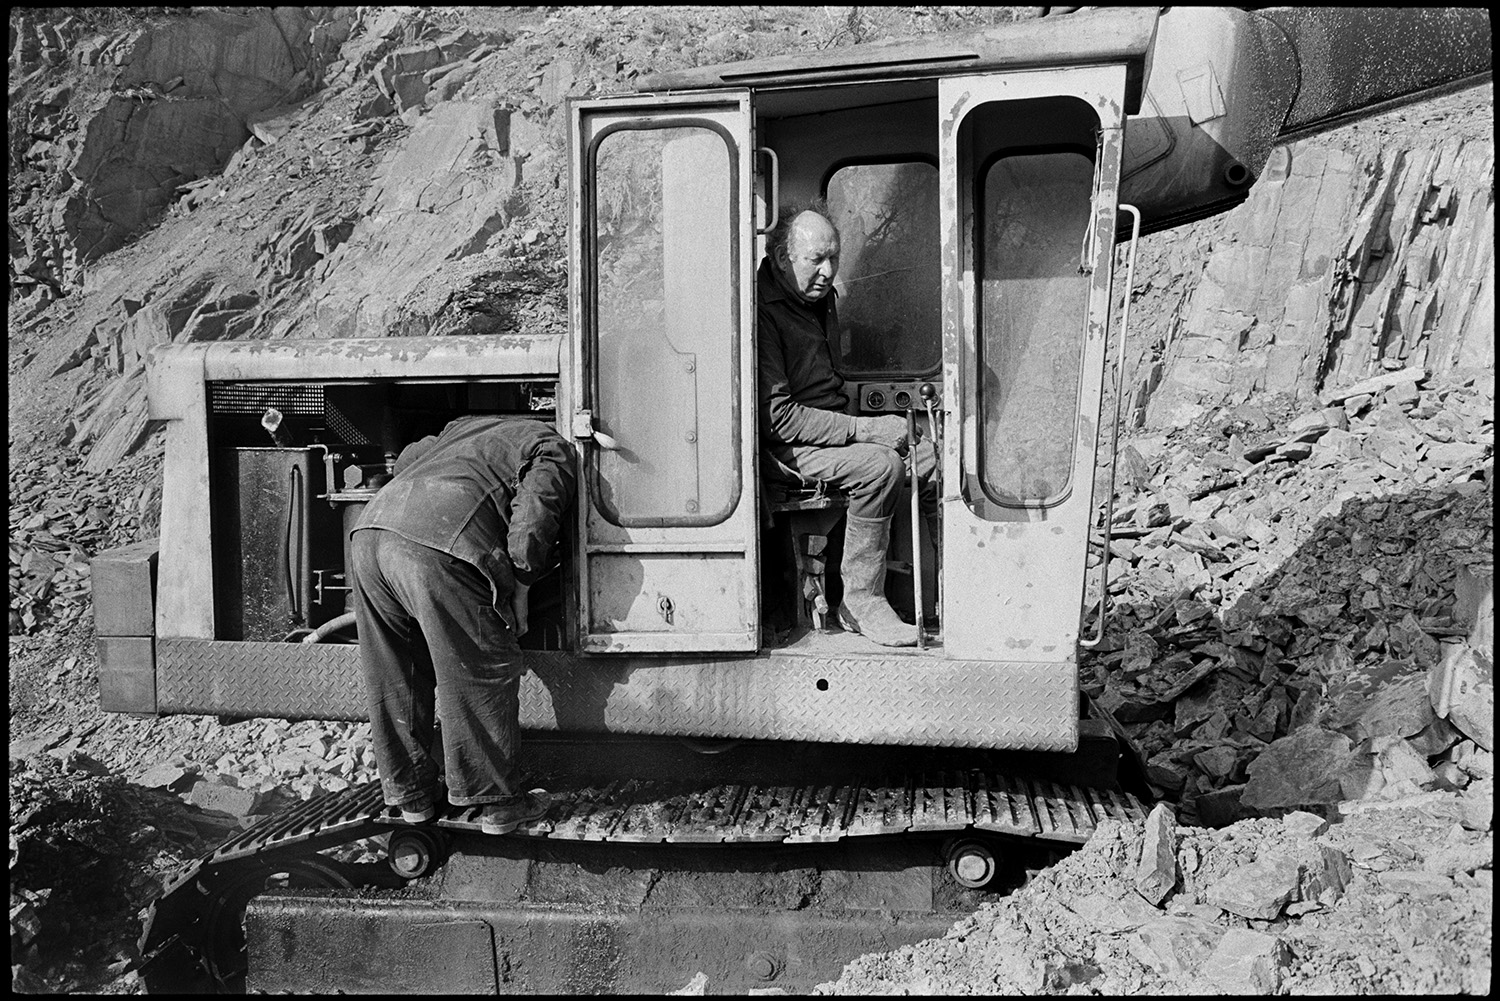 Men using mechanical shovel in quarry, excavator.
[Dennis Harris looking at the engine of an excavator at Newbridge Quarry, Dolton. He is stood on the caterpillar tracks of the digger. Harold Glover is sat in the cab of the excavator. Quarried stone can be seen in the background.]